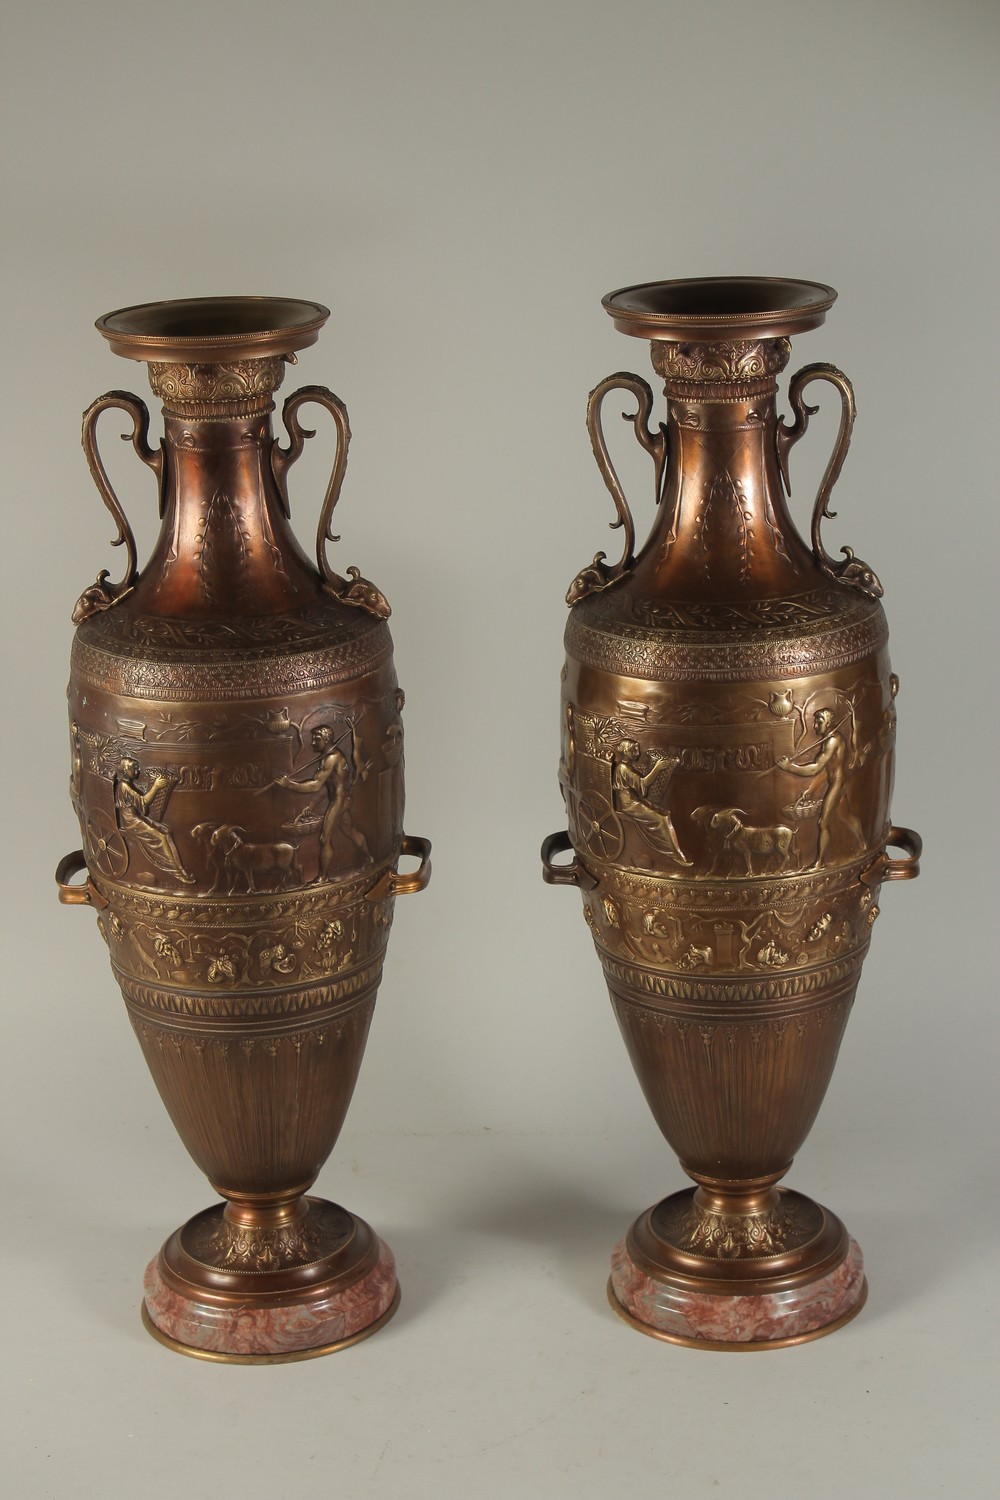 A SUPERB PAIR OF TWO-HANDLED CLASSICAL BRONZE URNS decorated with panels of classical figures.